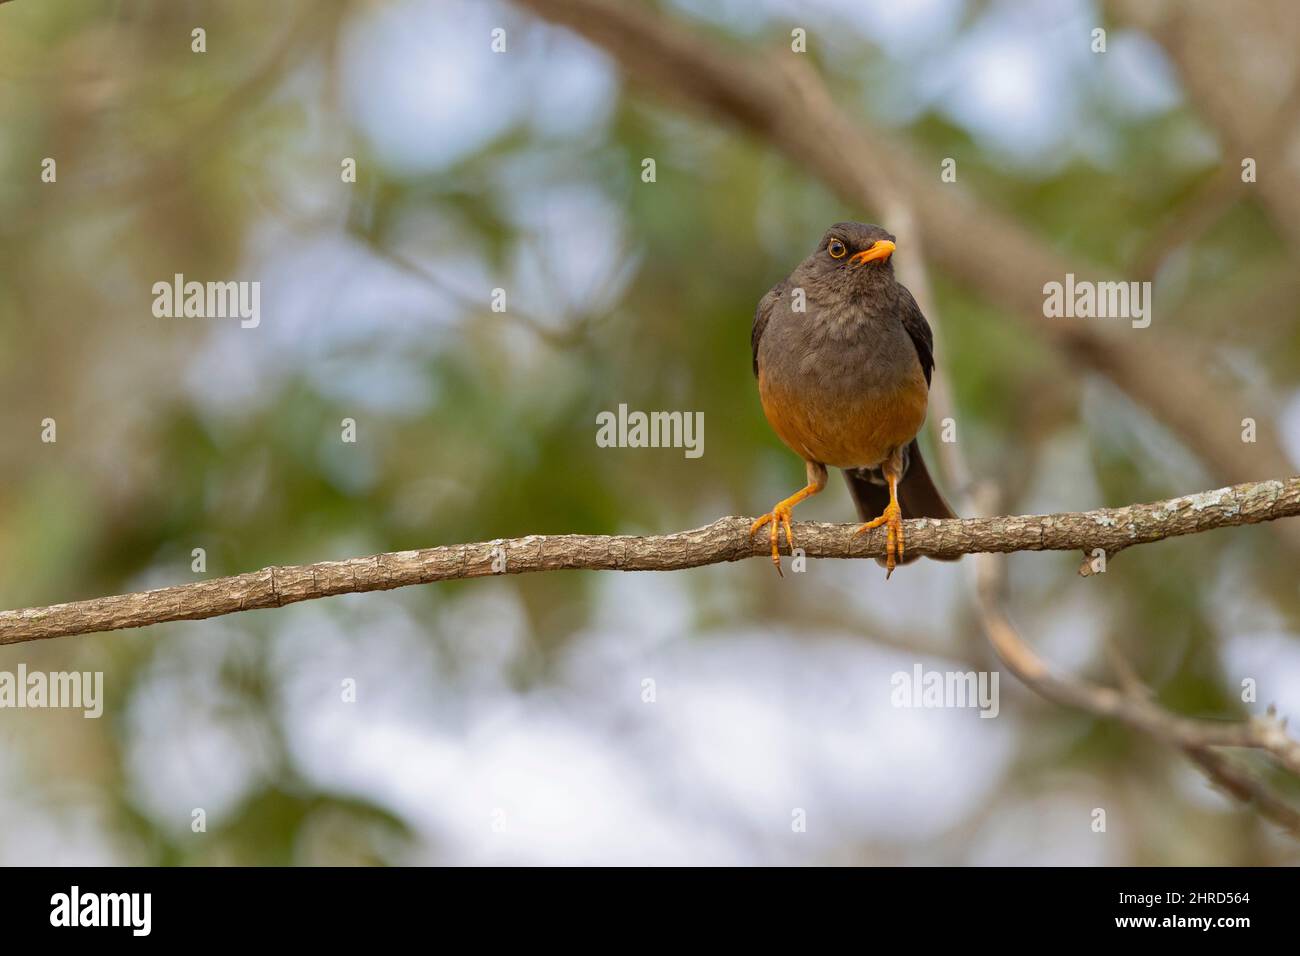 An abyssinian thrush (Turdus abyssinicus) perched on a branch of a tree. Stock Photo